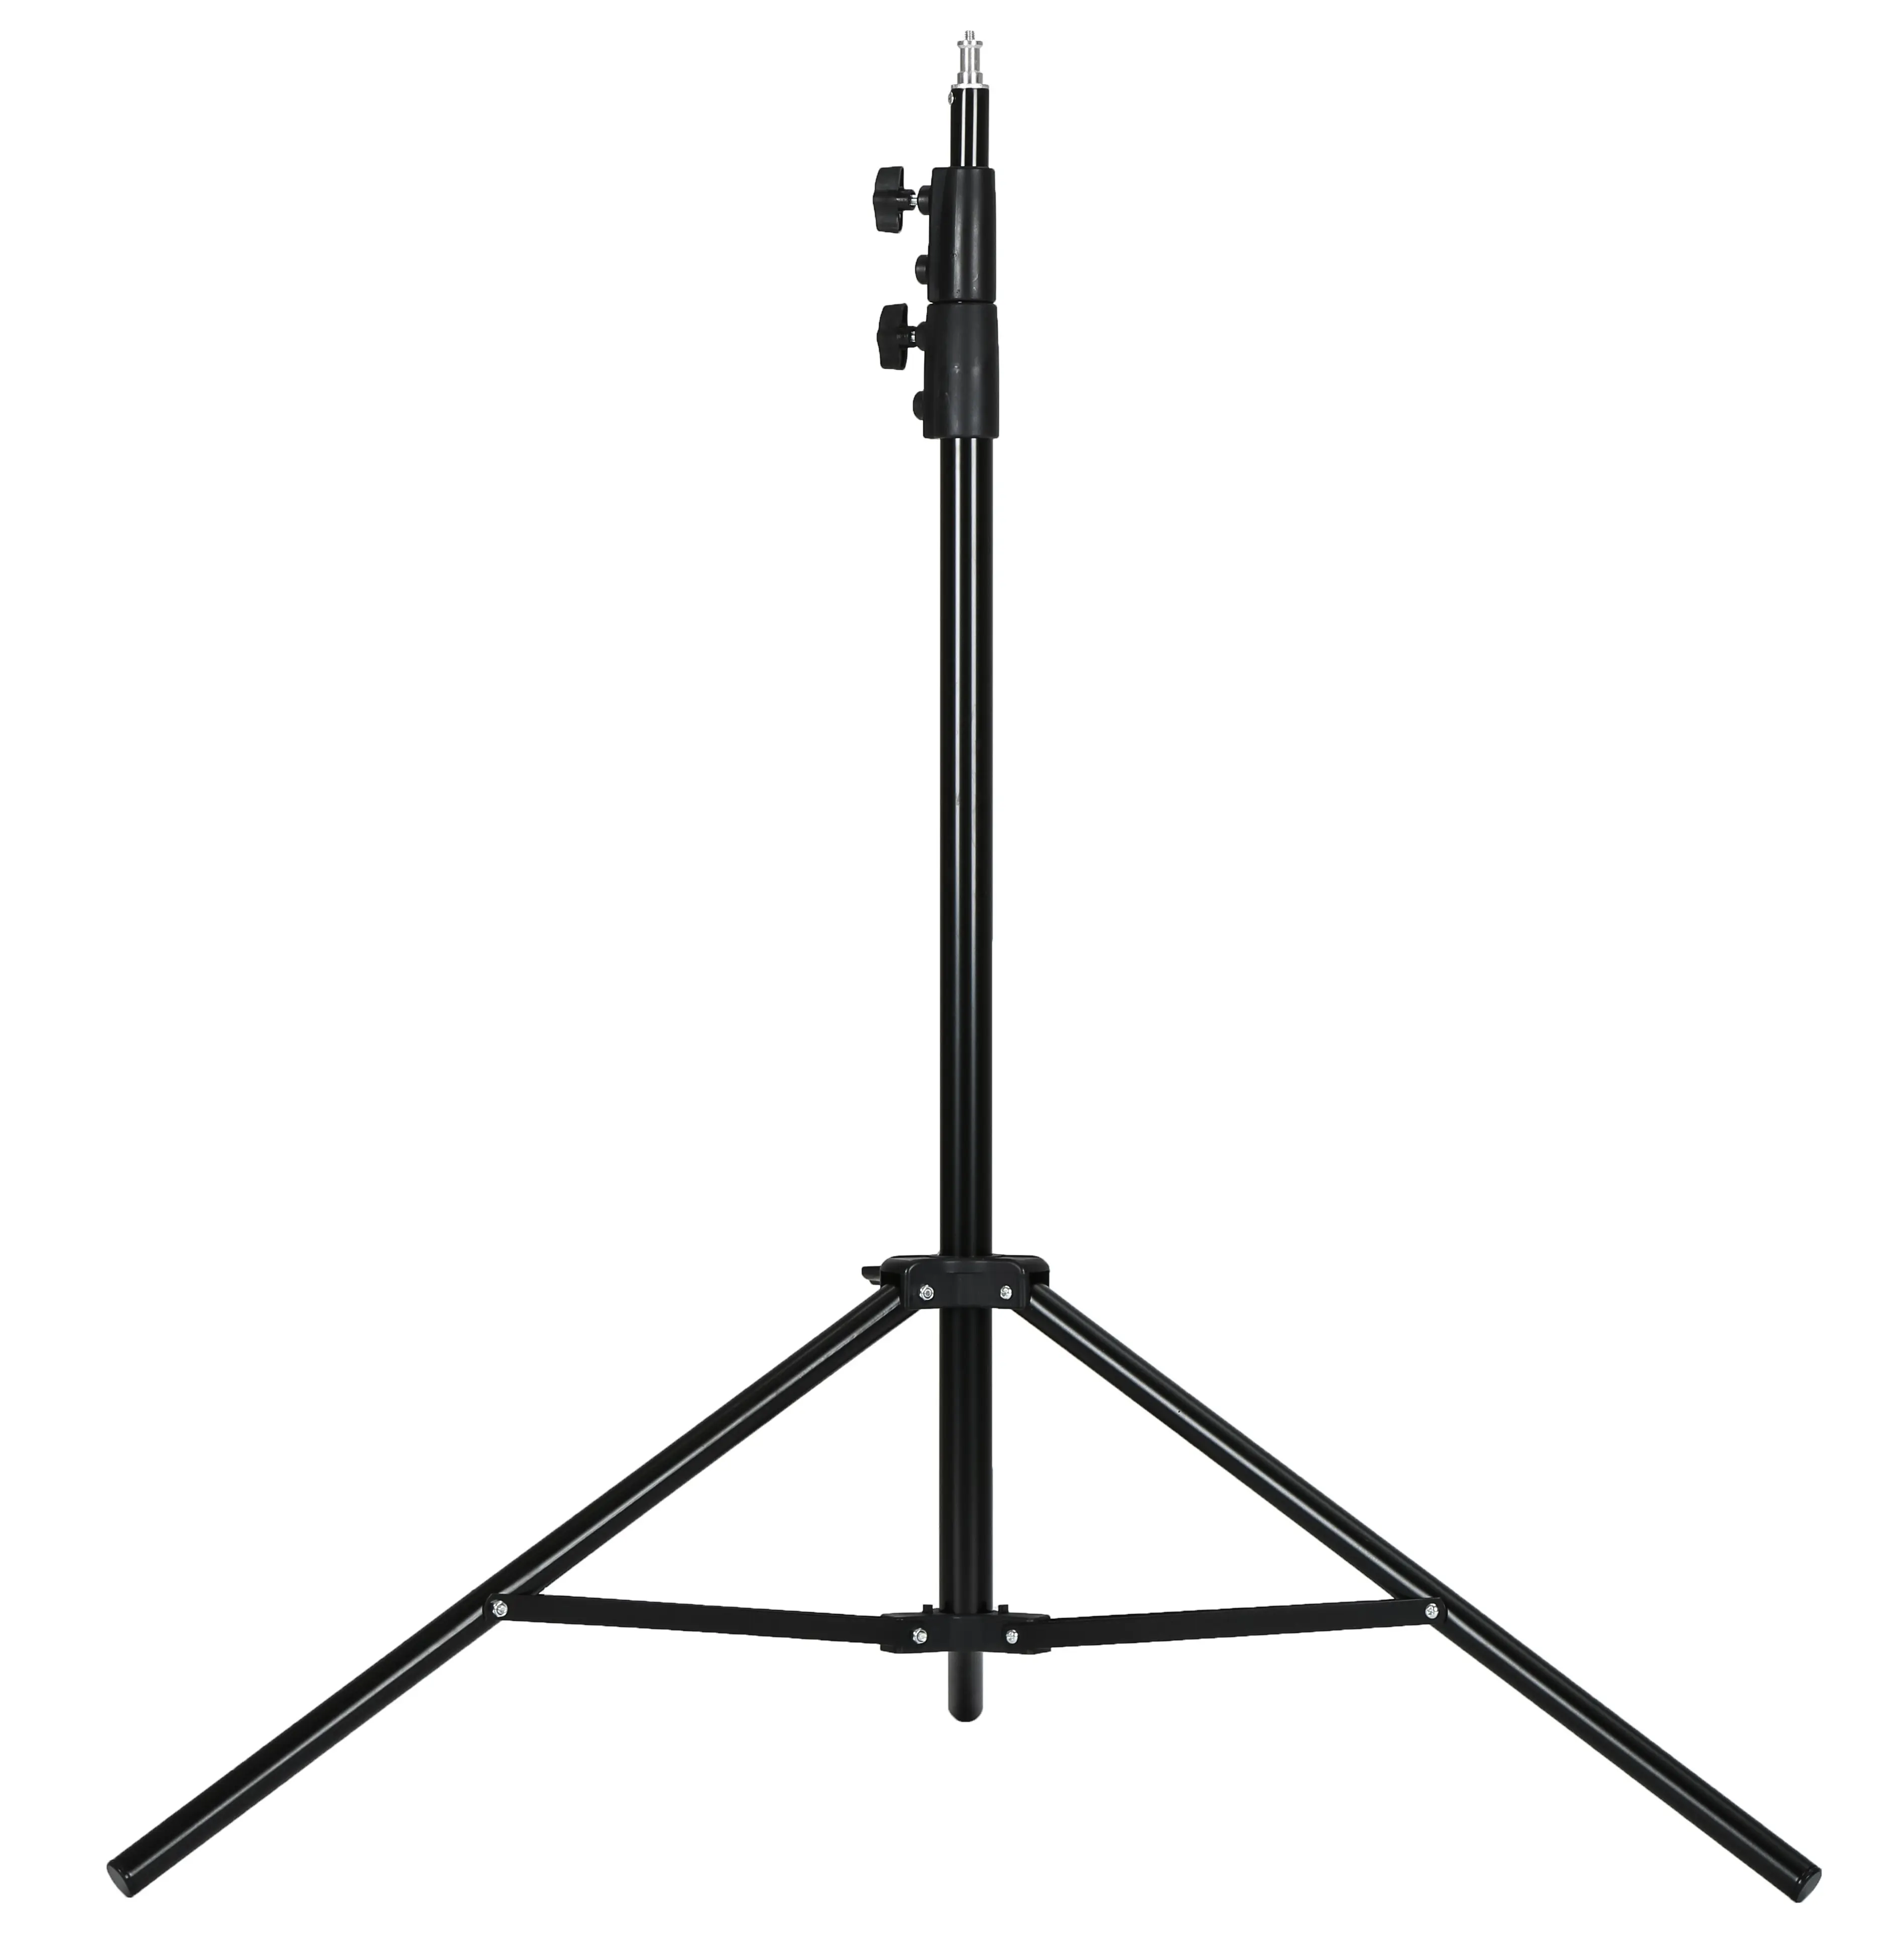 BY-605 200cm Professional Light Stand Photography Wholesale Professional Photo Studio Light Stand/tripod Led Light Stands